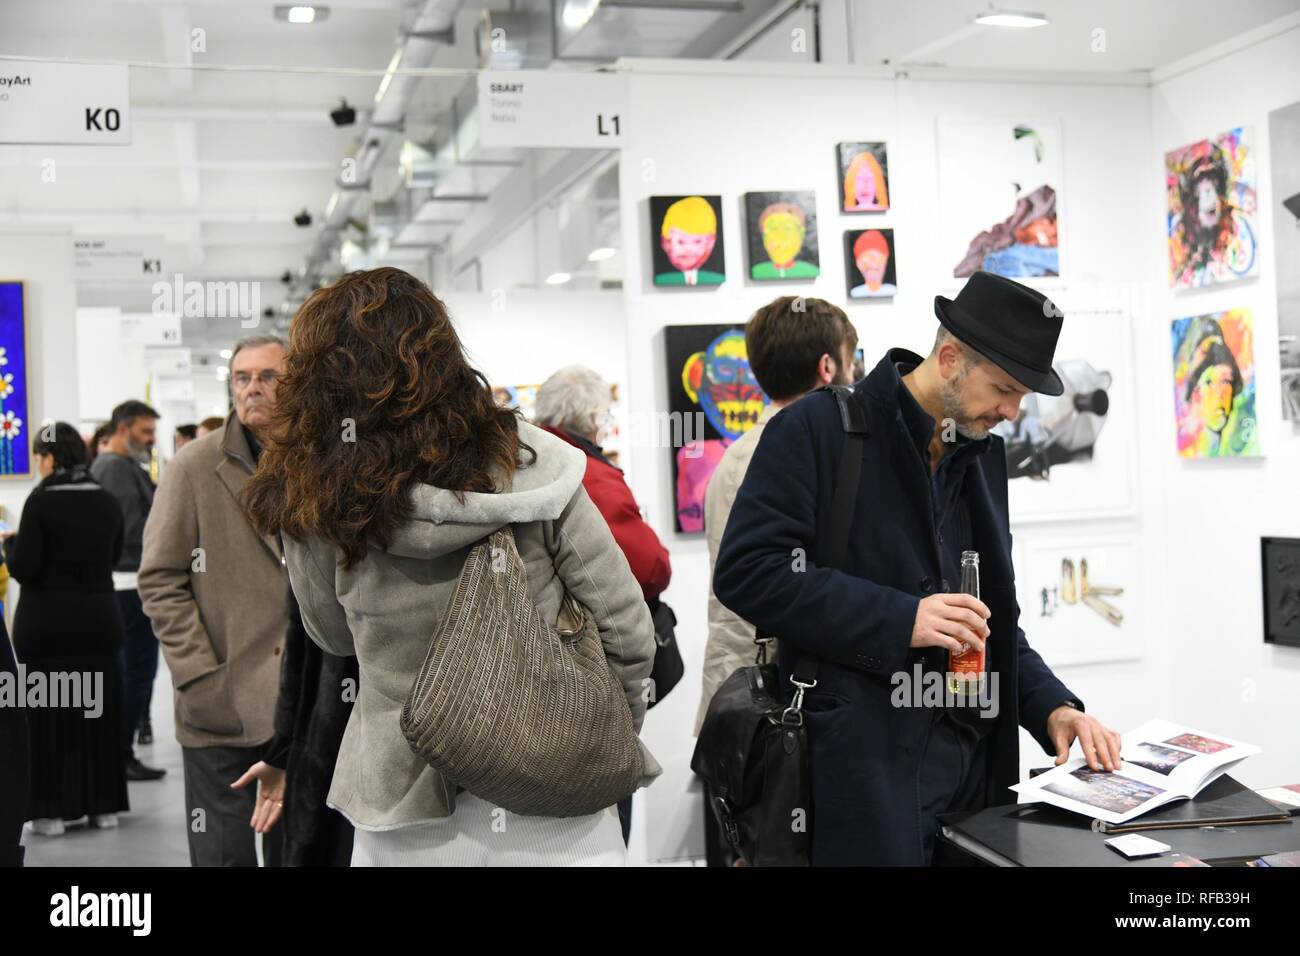 Milan, 24 January 2019 - Back Affordable Art Fair, the contemporary art fair that over the years has conquered the heart of the Milanese, bringing in their homes beauty, creativity and emotions contained in the works, for sale up to 6,000 euros. Lose yourself in art is the slogan and fil rouge of the 2019 edition, scheduled for Superstudio PiÃ¹ from 25 to 27 January (inauguration on 24th evening by invitation or online presale), with the participation of 85 galleries from all over the world. So many new features in the labyrinthine space of Affordable Art Fair, because to find yourself sometim Stock Photo